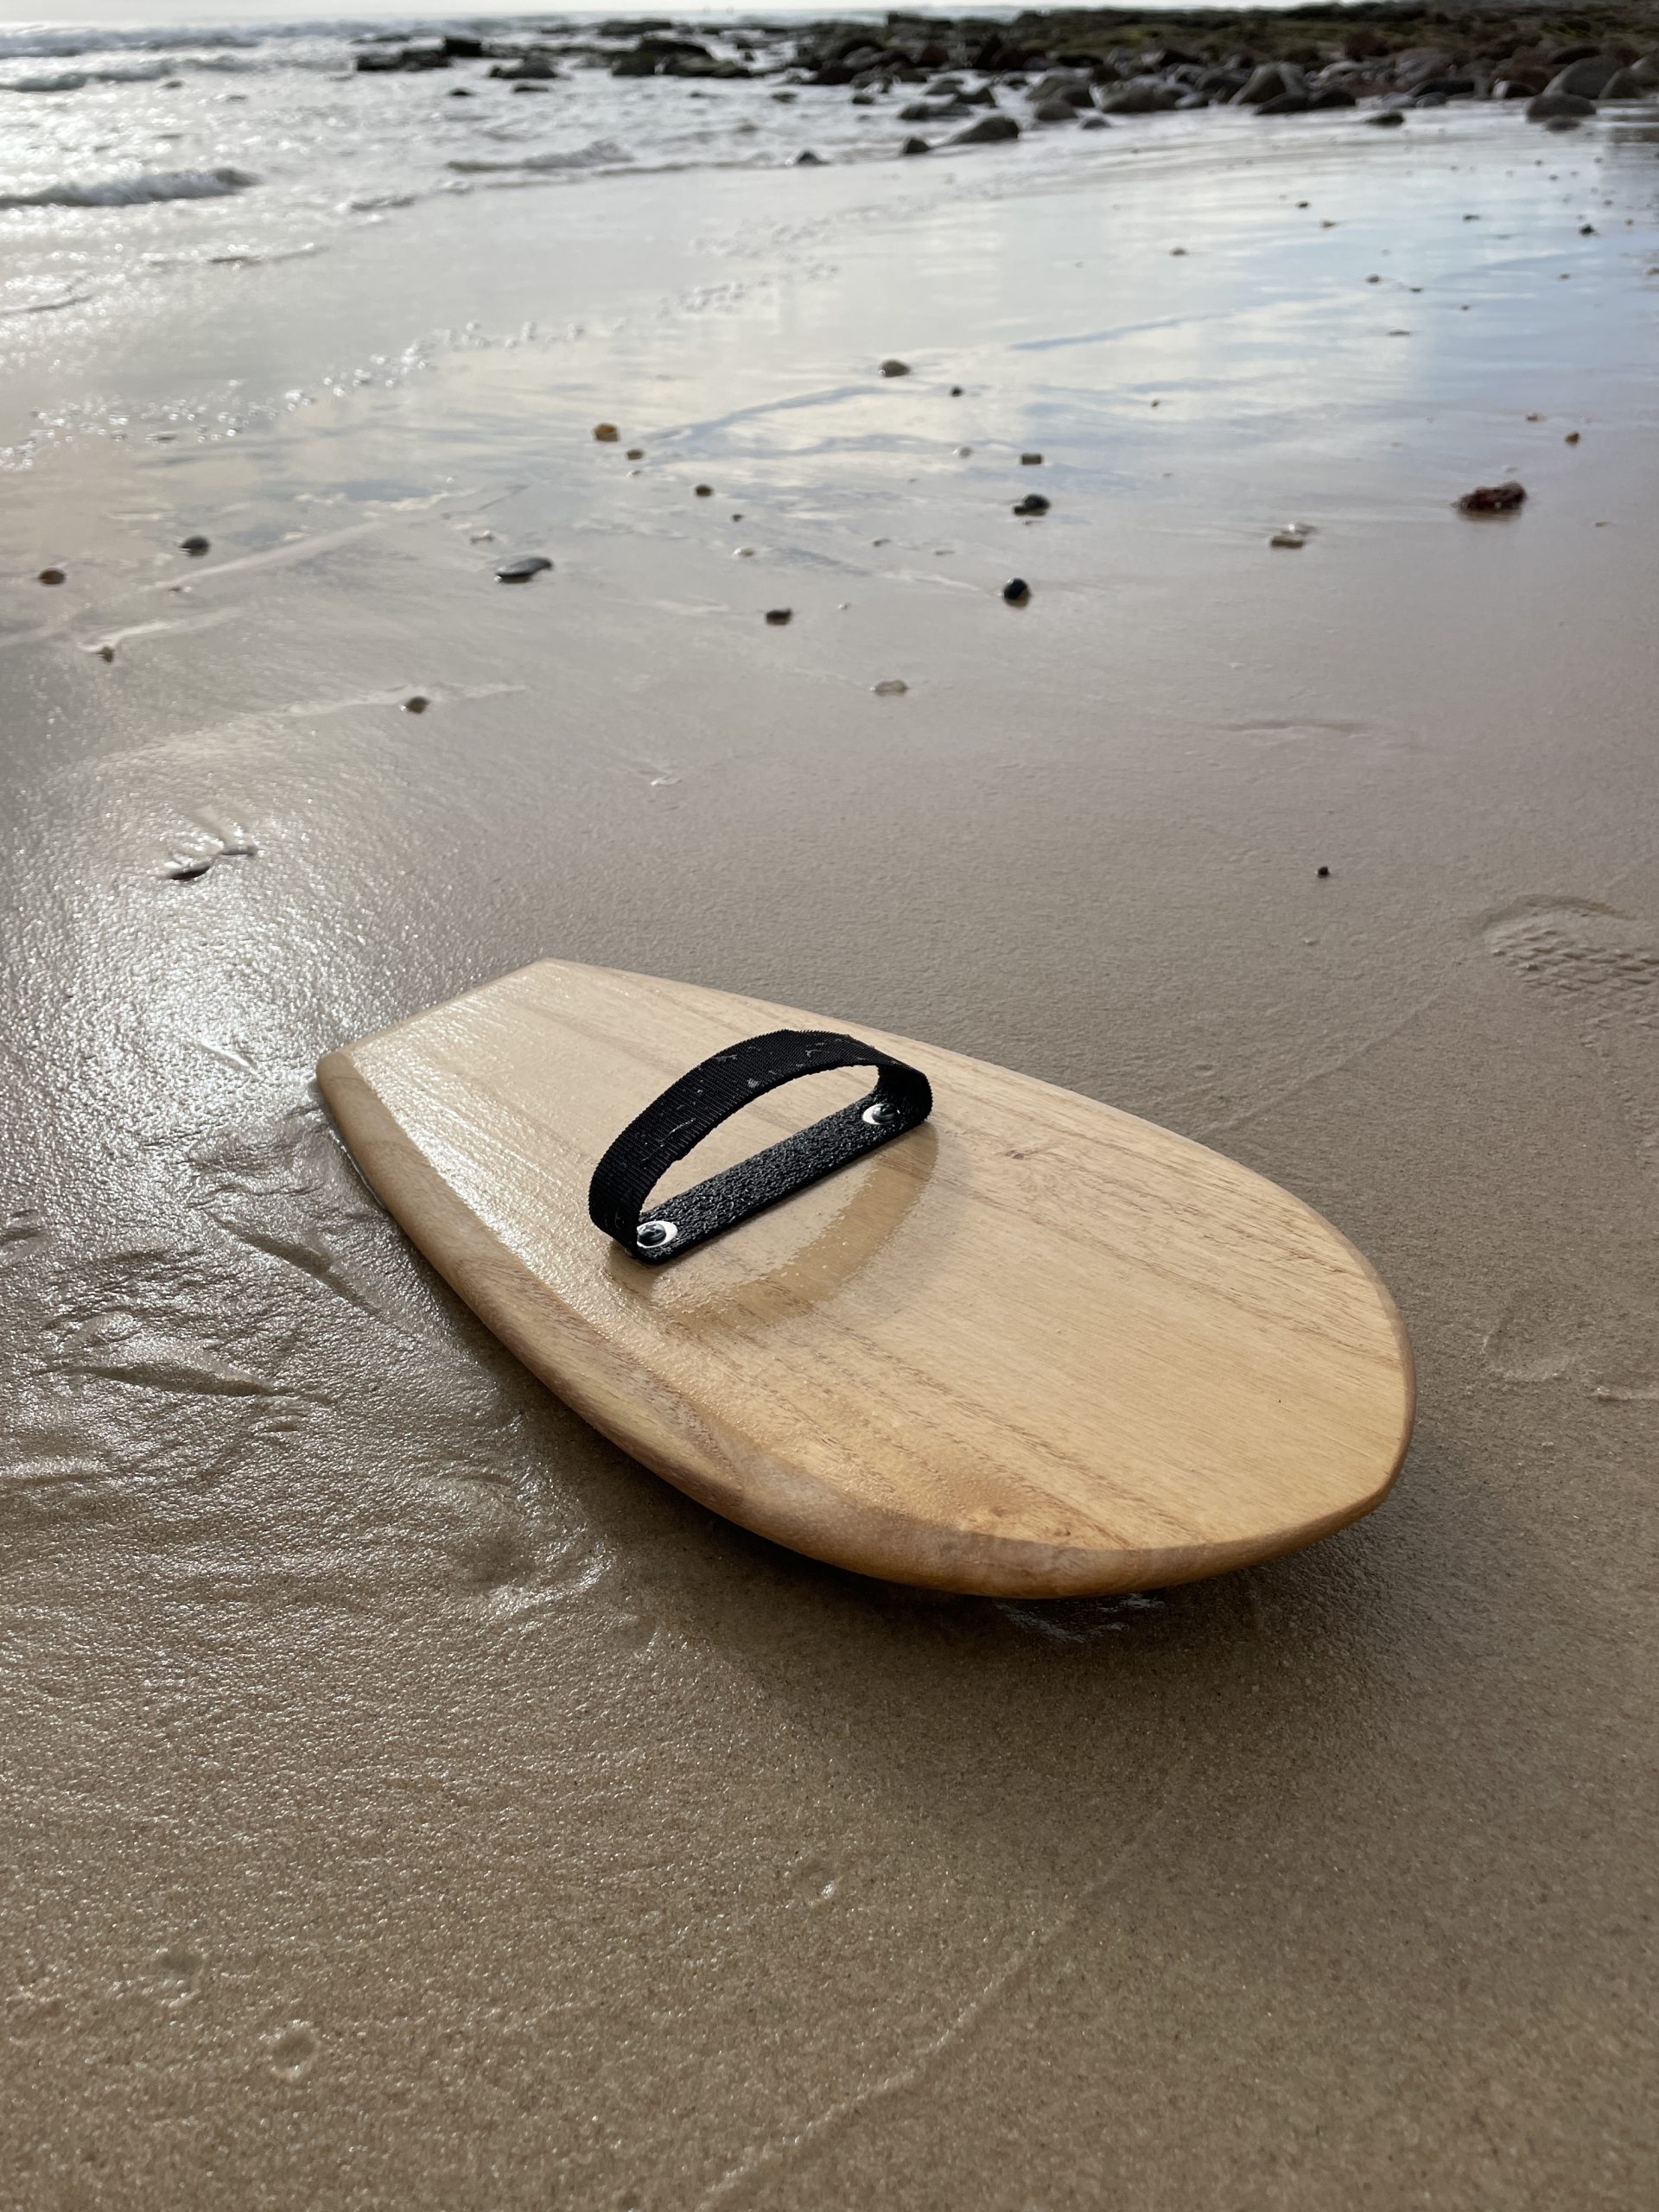 Craft a Wooden Handboard for Bodysurfing with Stuart Bywater